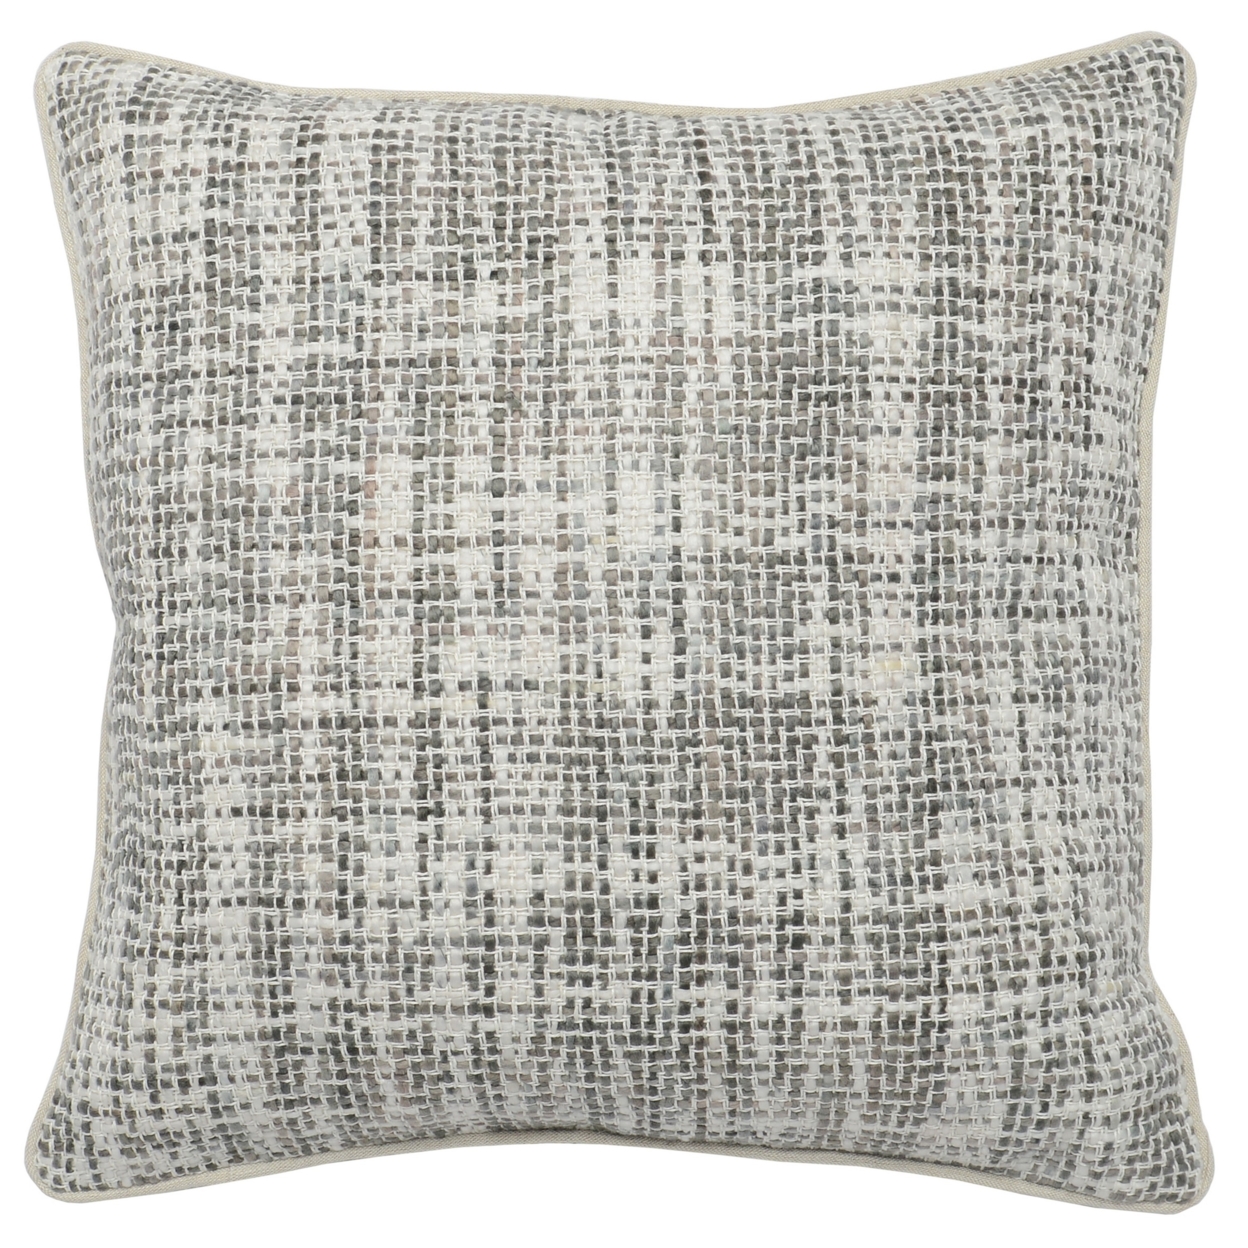 Square Fabric Throw Pillow With Hand Woven Pattern, Gray And White- Saltoro Sherpi